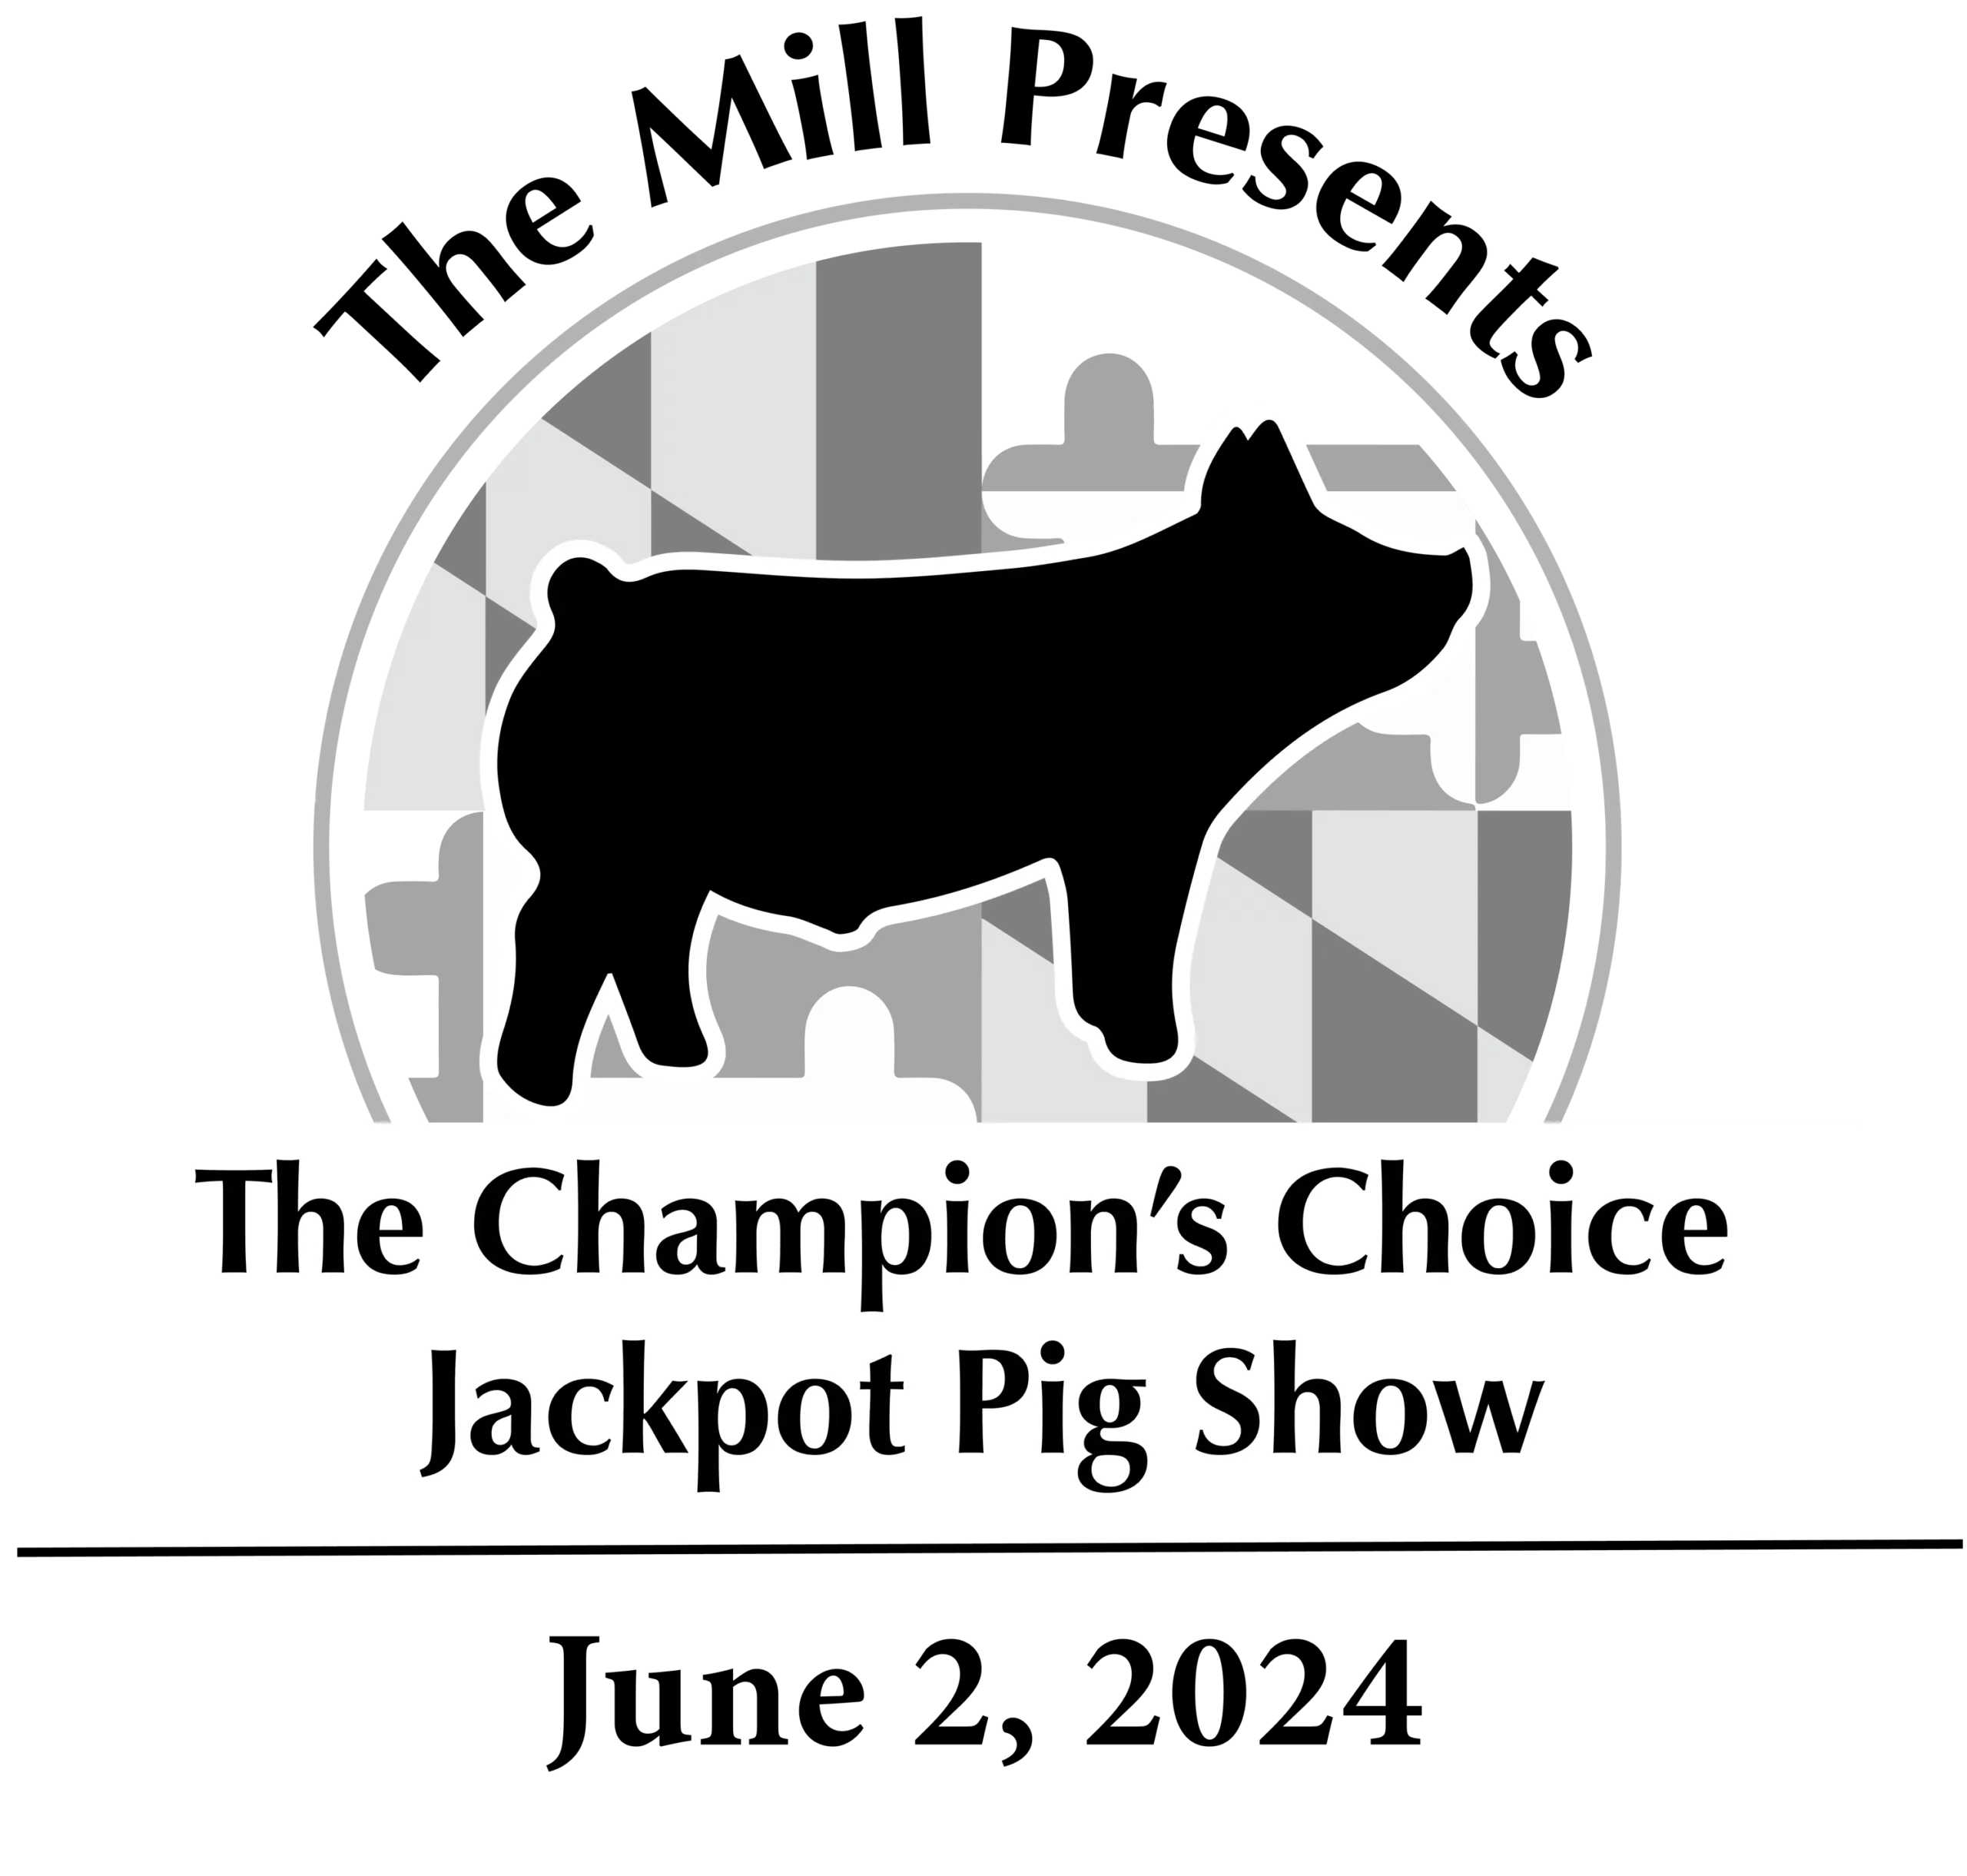 Jackpot Pig Show - The Mill of Bel Air